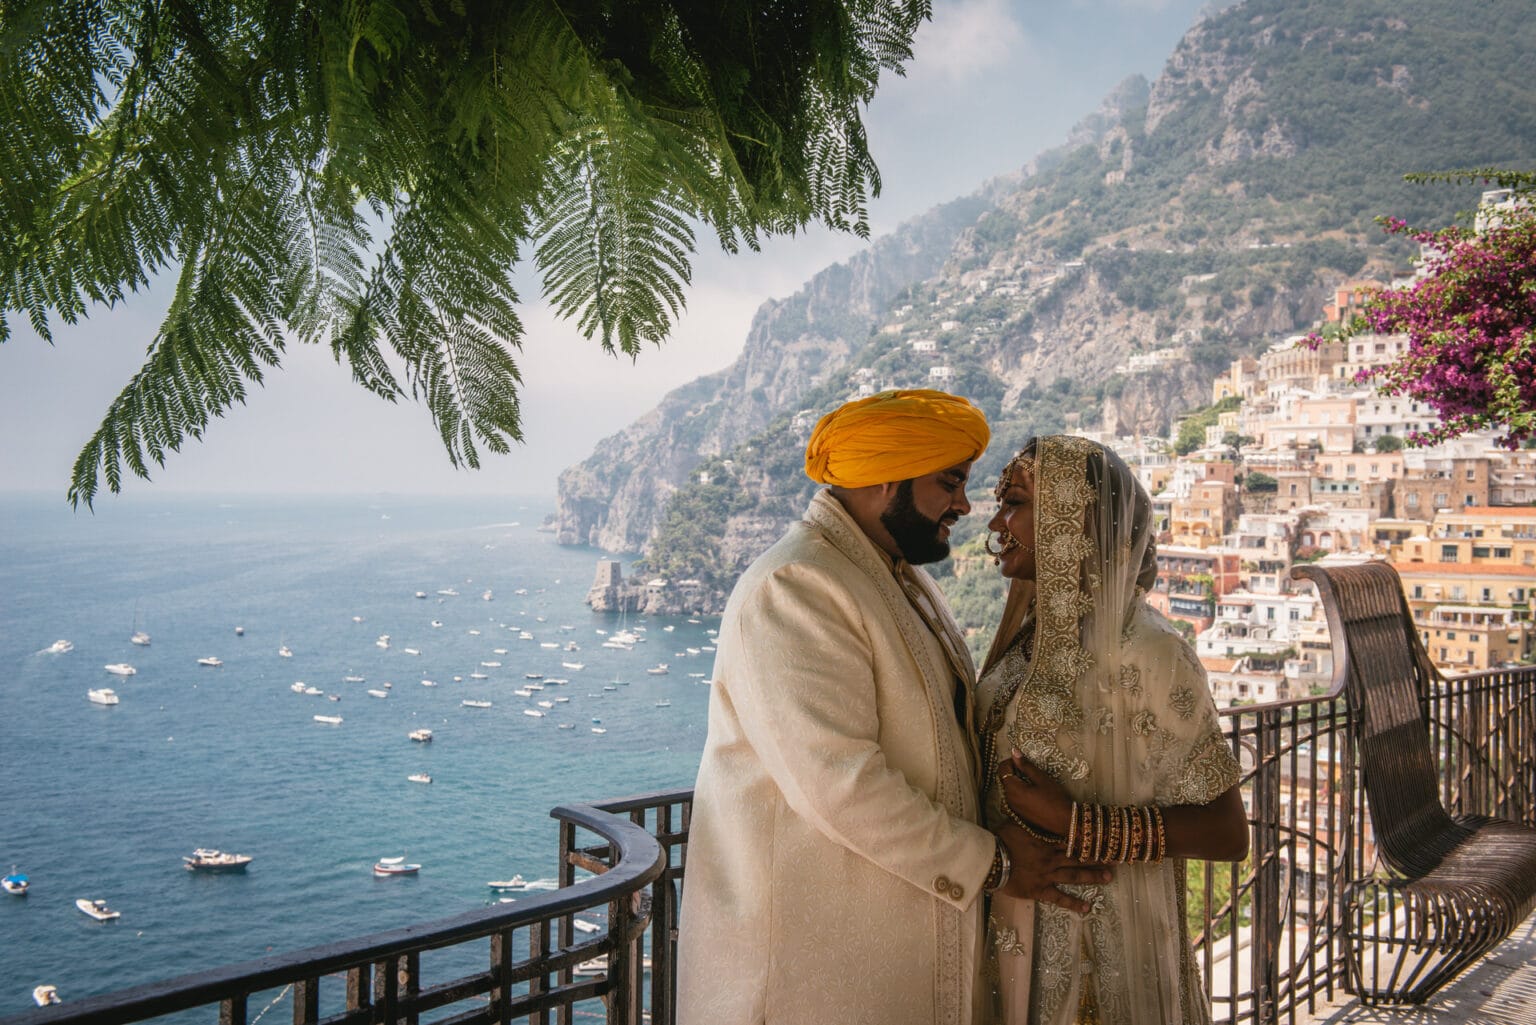 Couple in their traditional Sikh wedding outfits posing in the streets of Positano during their elopement on the Amalfi Coast